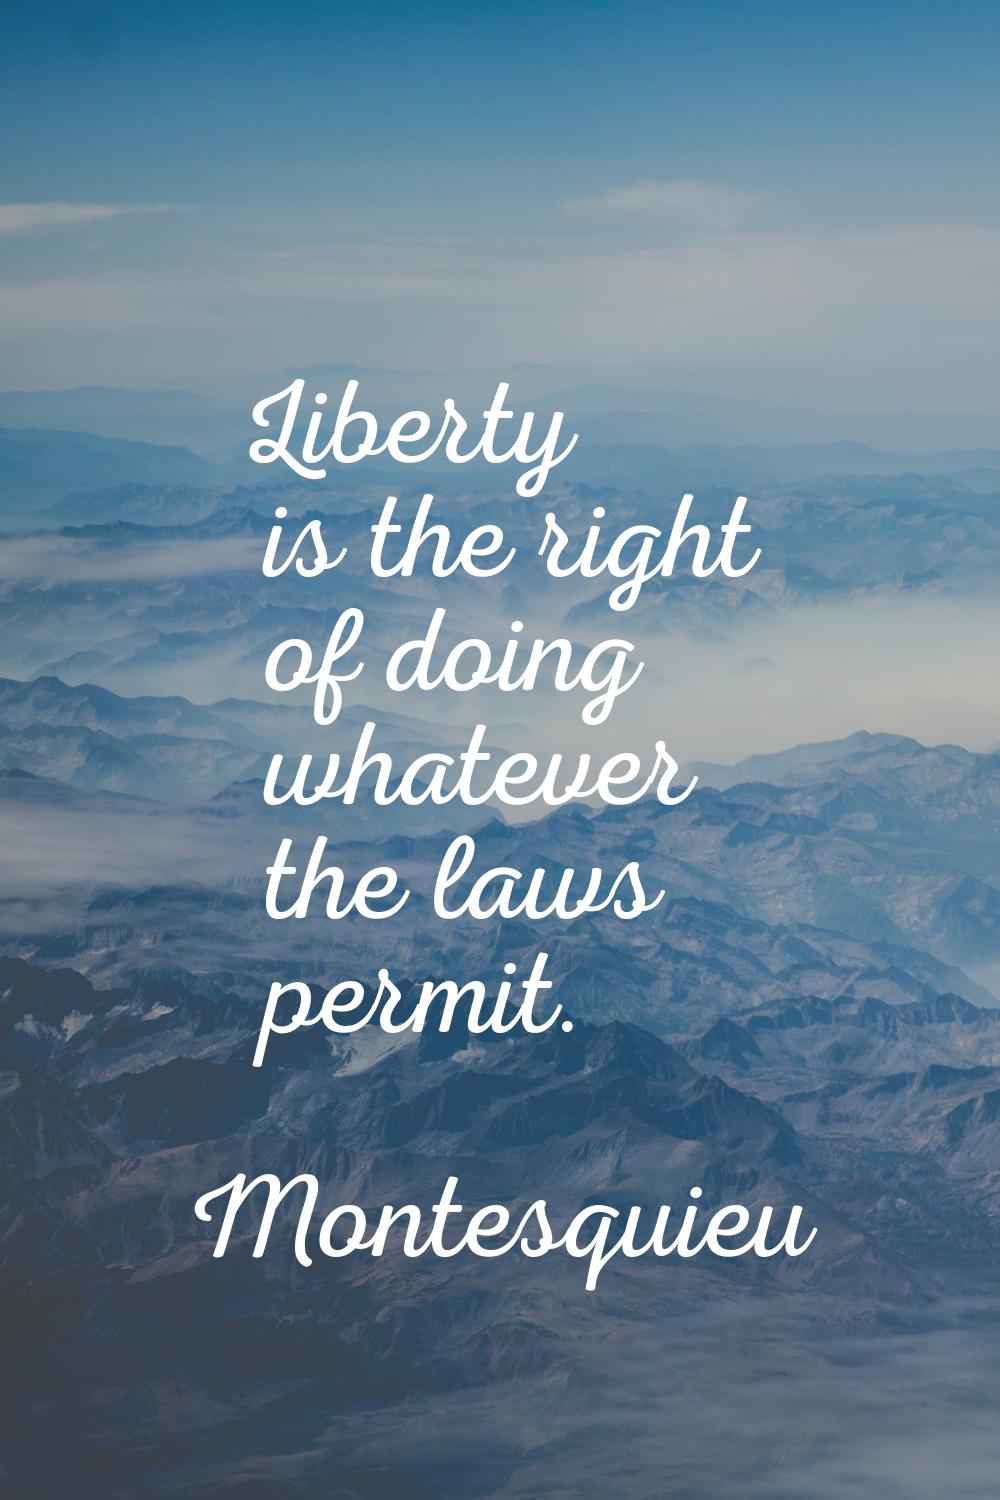 Liberty is the right of doing whatever the laws permit.